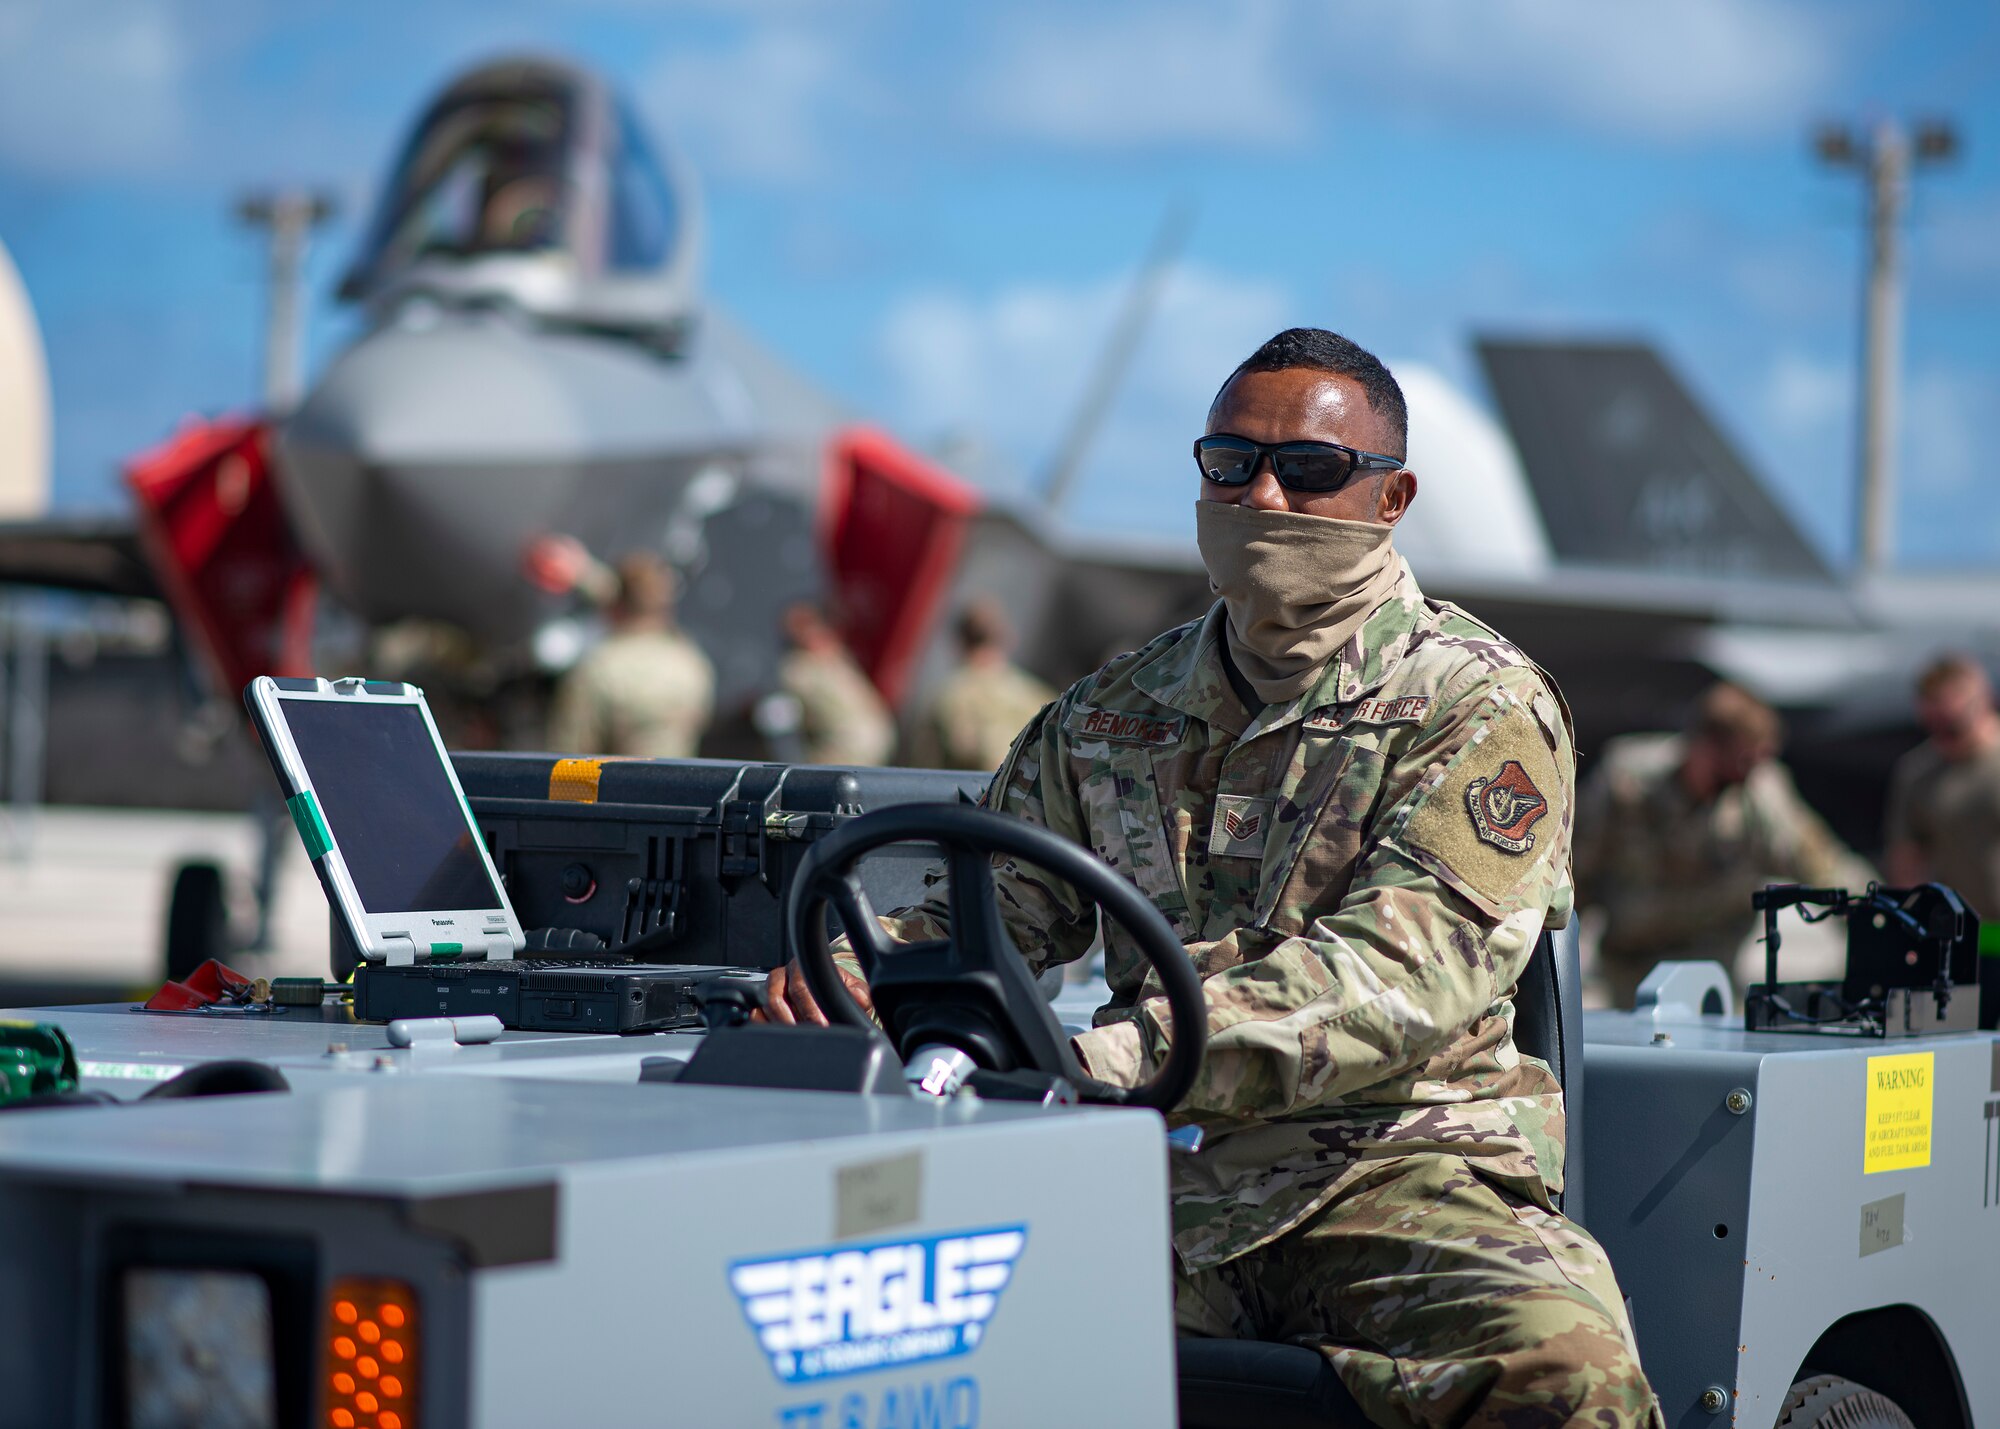 U.S. Air Force Staff Sgt. Roger Remoket tows an F-35 Lightning II at Andersen Air Force Base, Guam, Feb. 23, 2021.